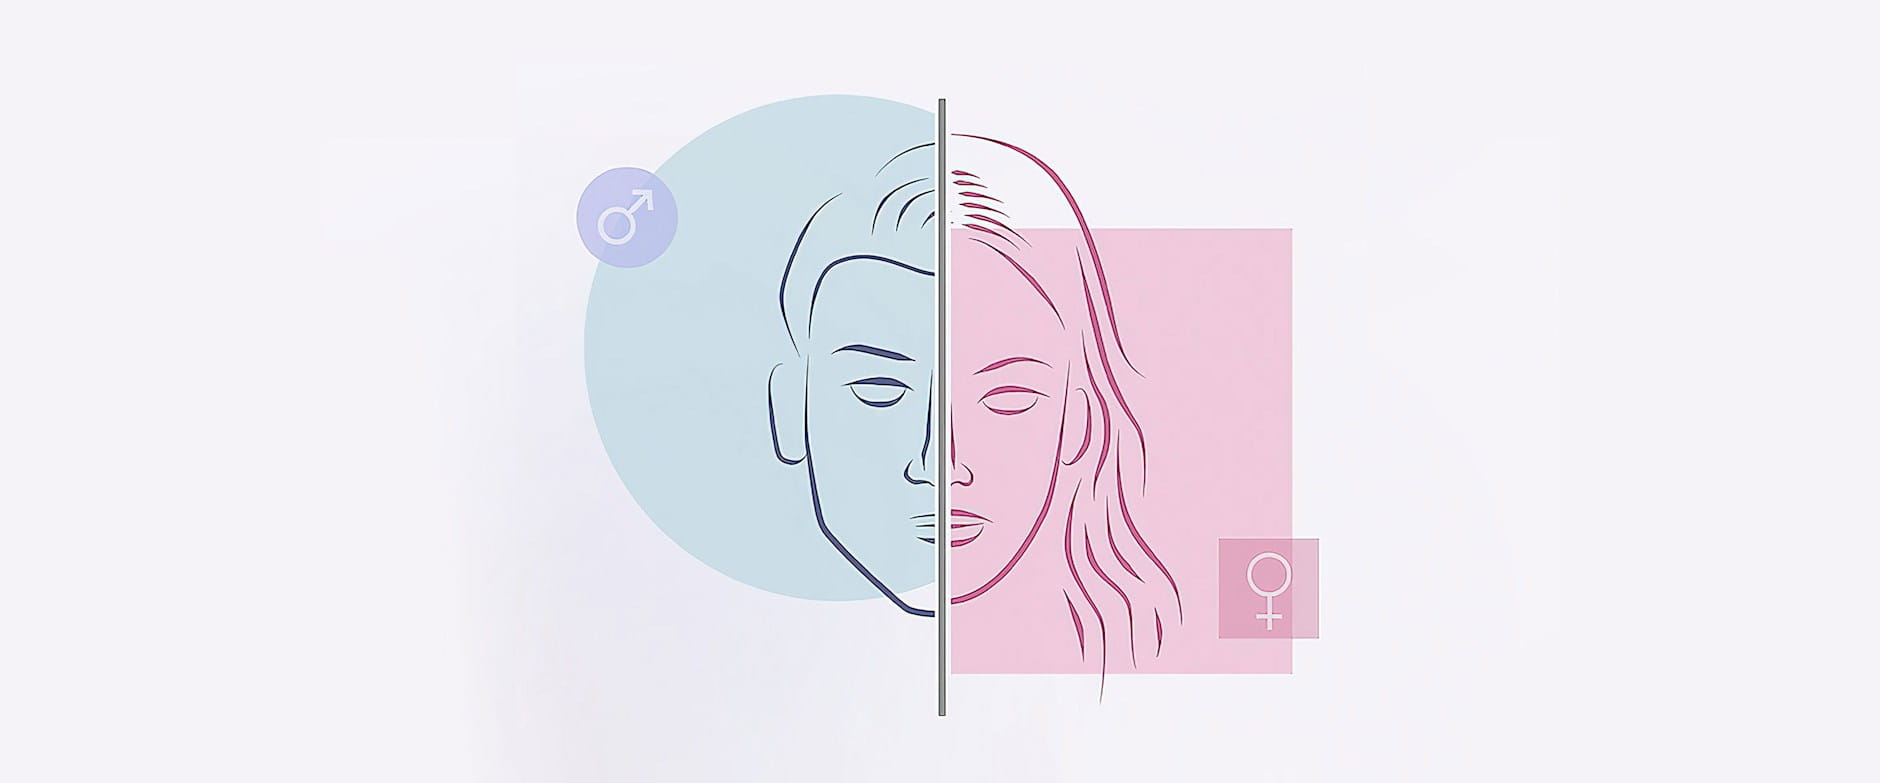 A man's and woman's face joined together